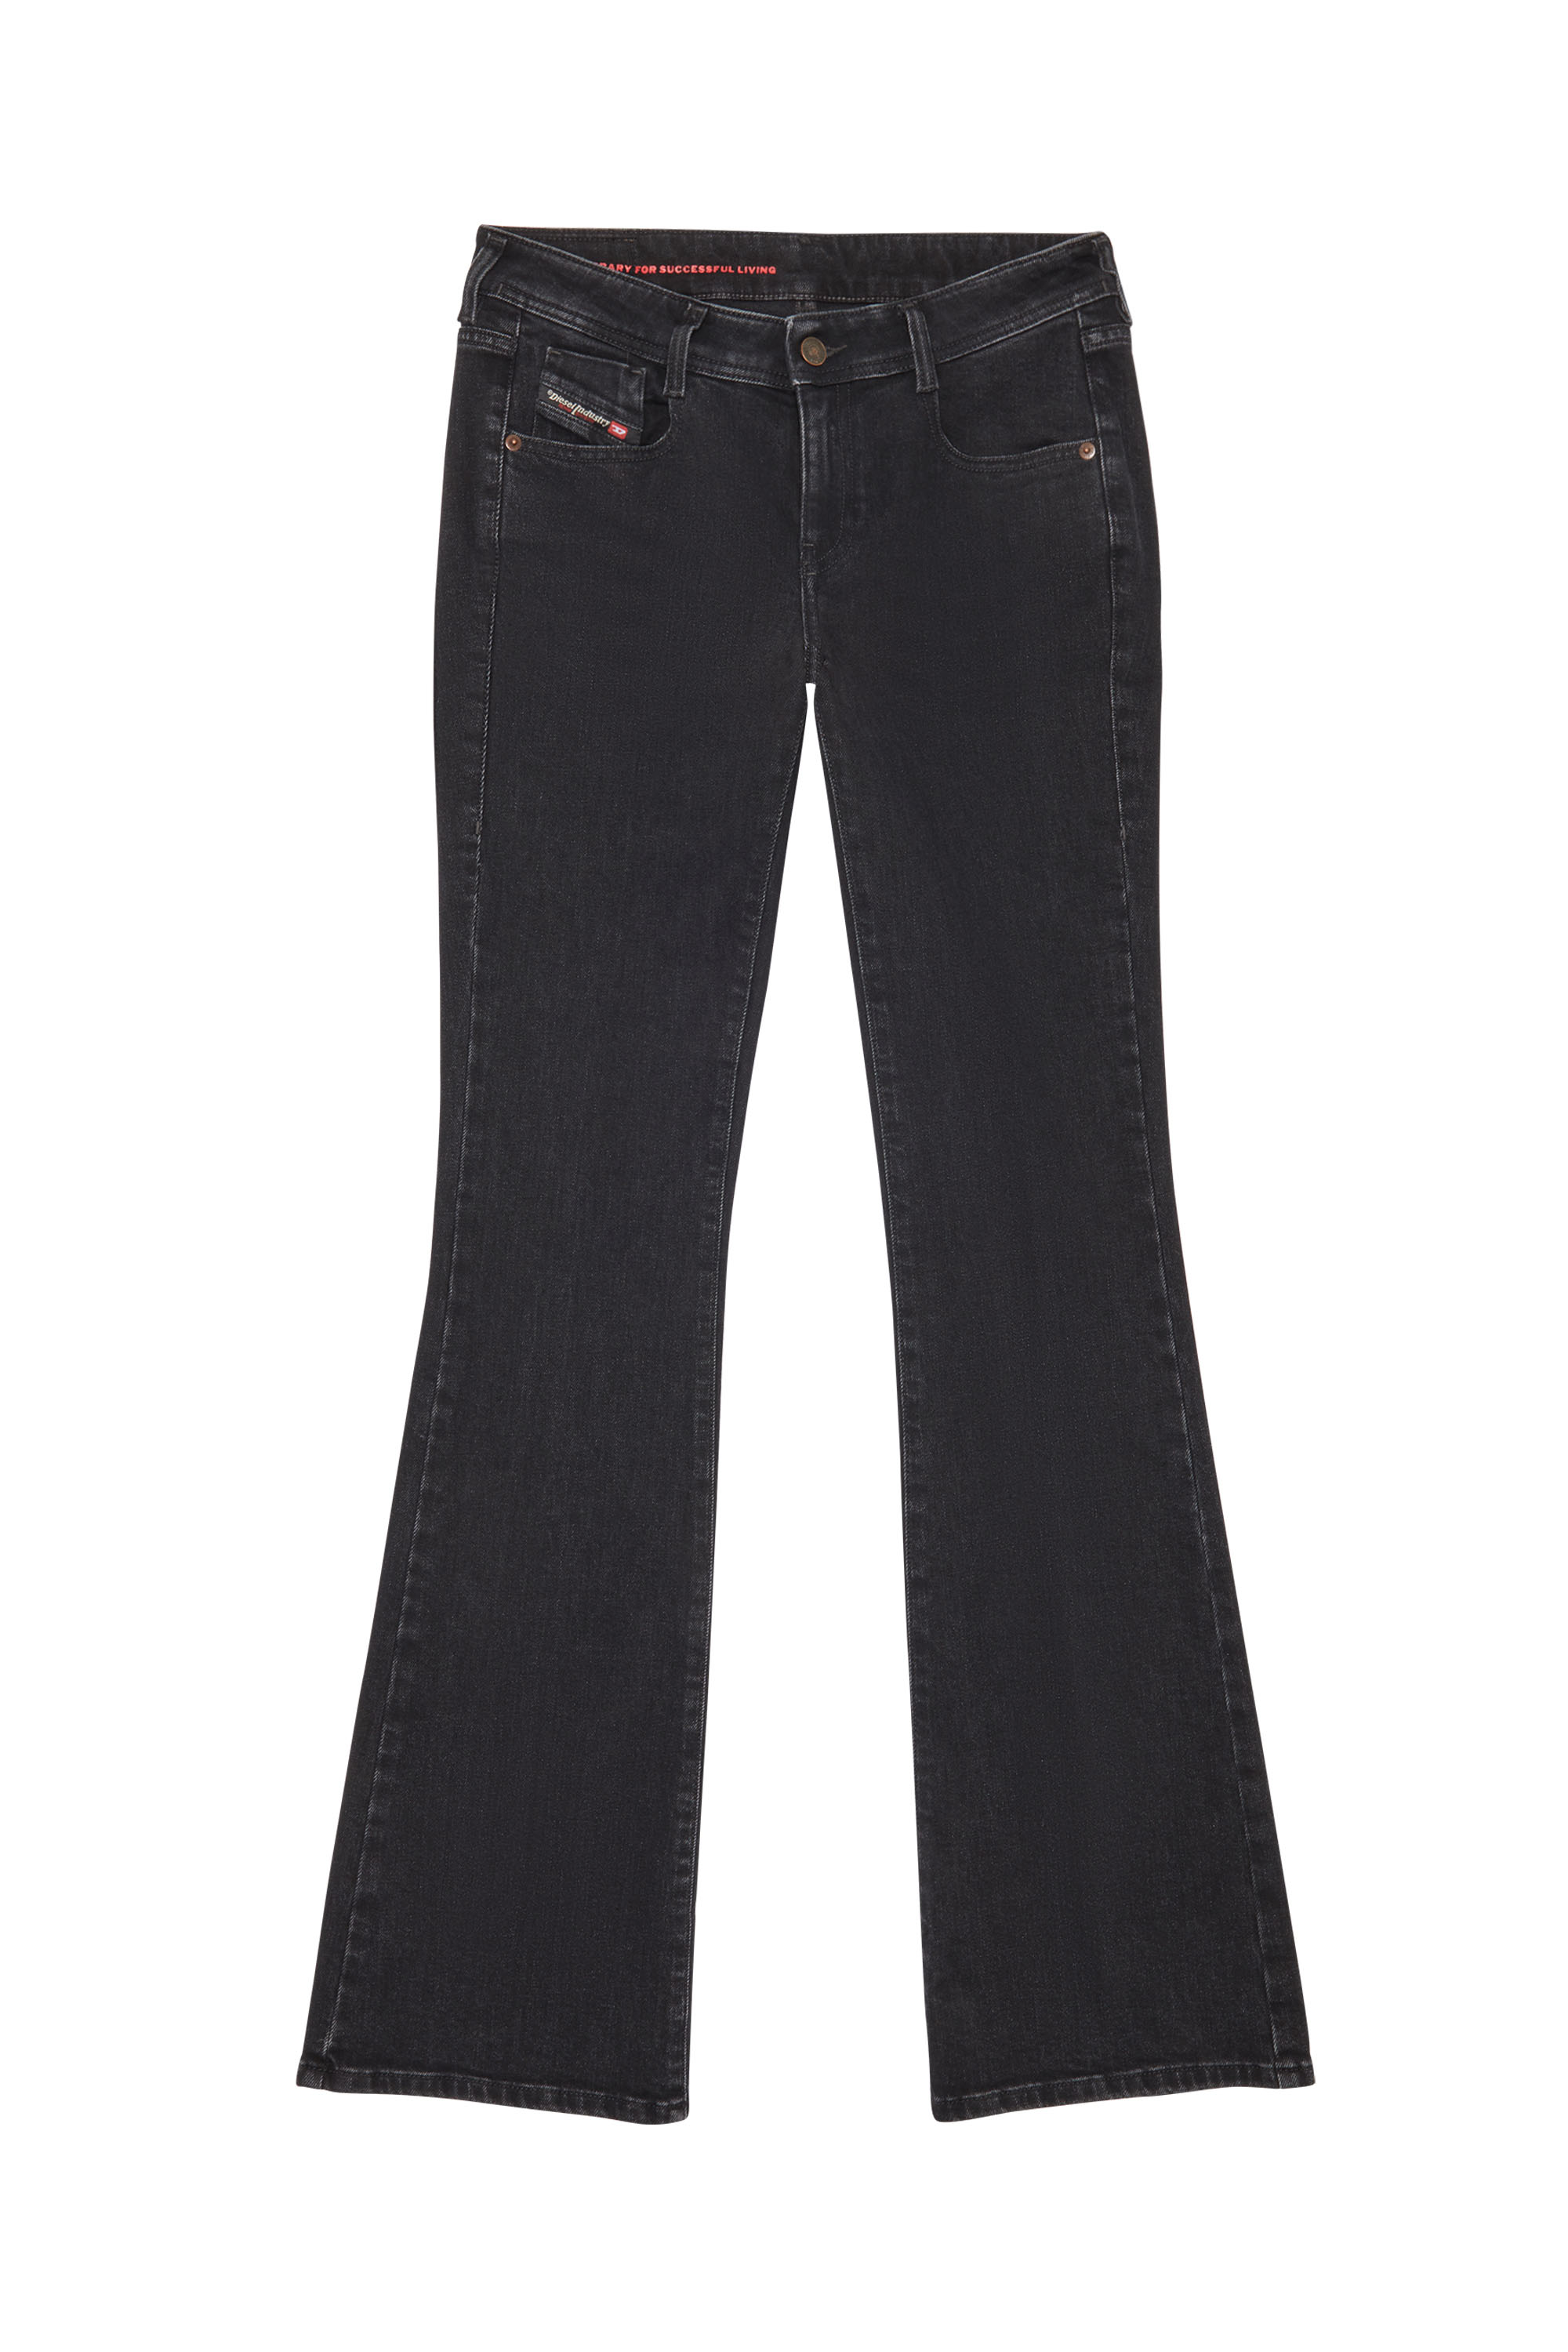 Bootcut and Flare Jeans 1969 D-Ebbey Z9C25, Black/Dark grey - Jeans